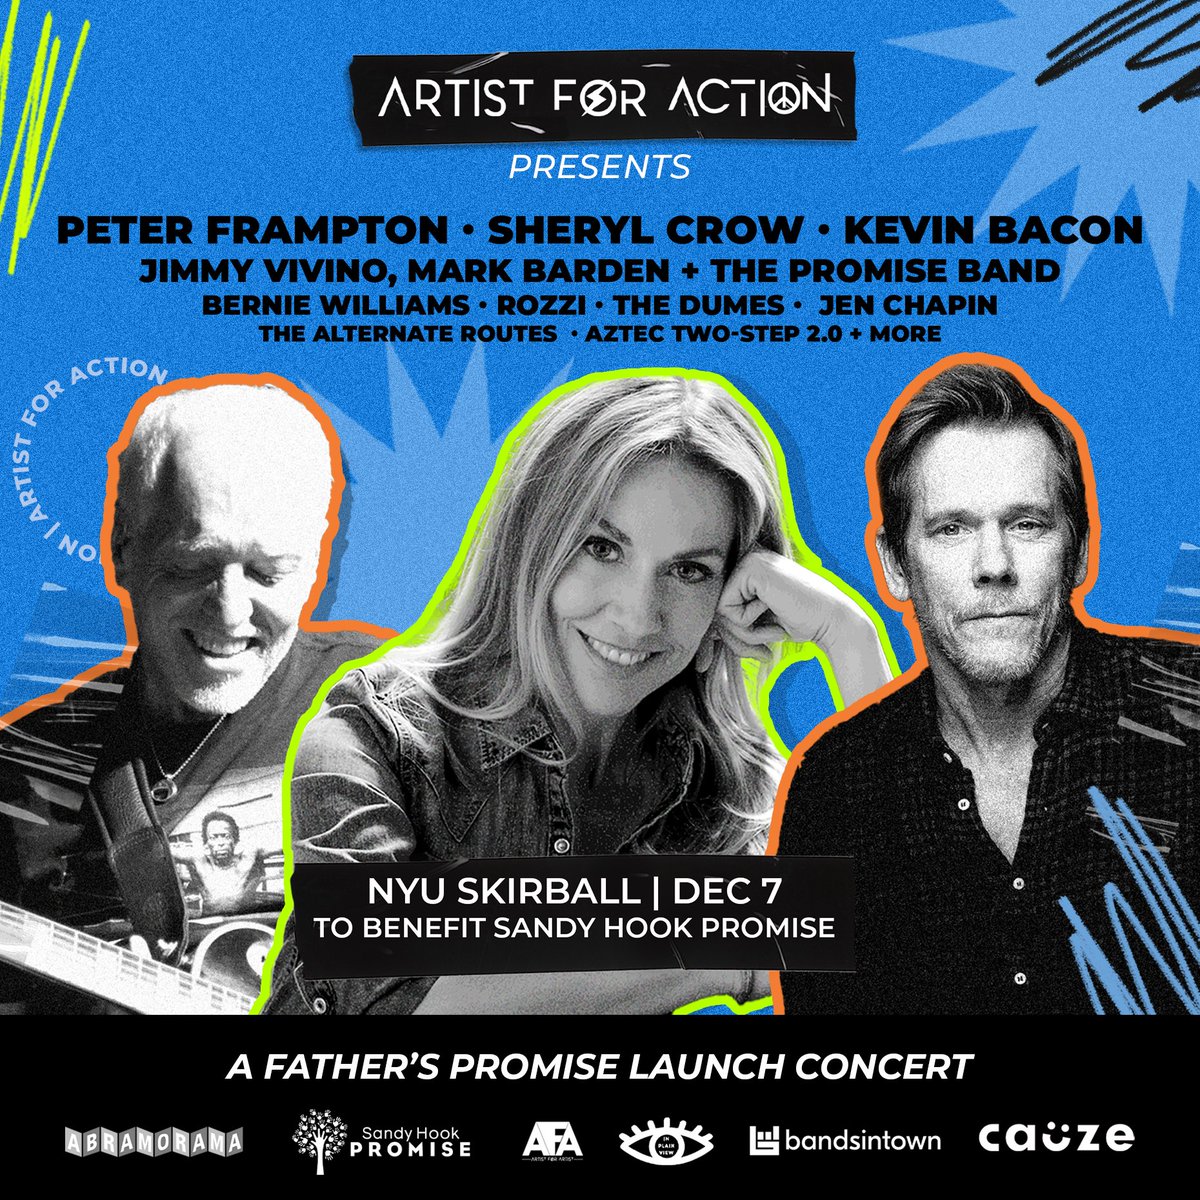 I am an Artist For Action! Less than a week until I join @sherylcrow @peterframpton @kevinbacon & special guests! Get tickets now to support @afaventures @sandyhook! found.ee/nyutickets